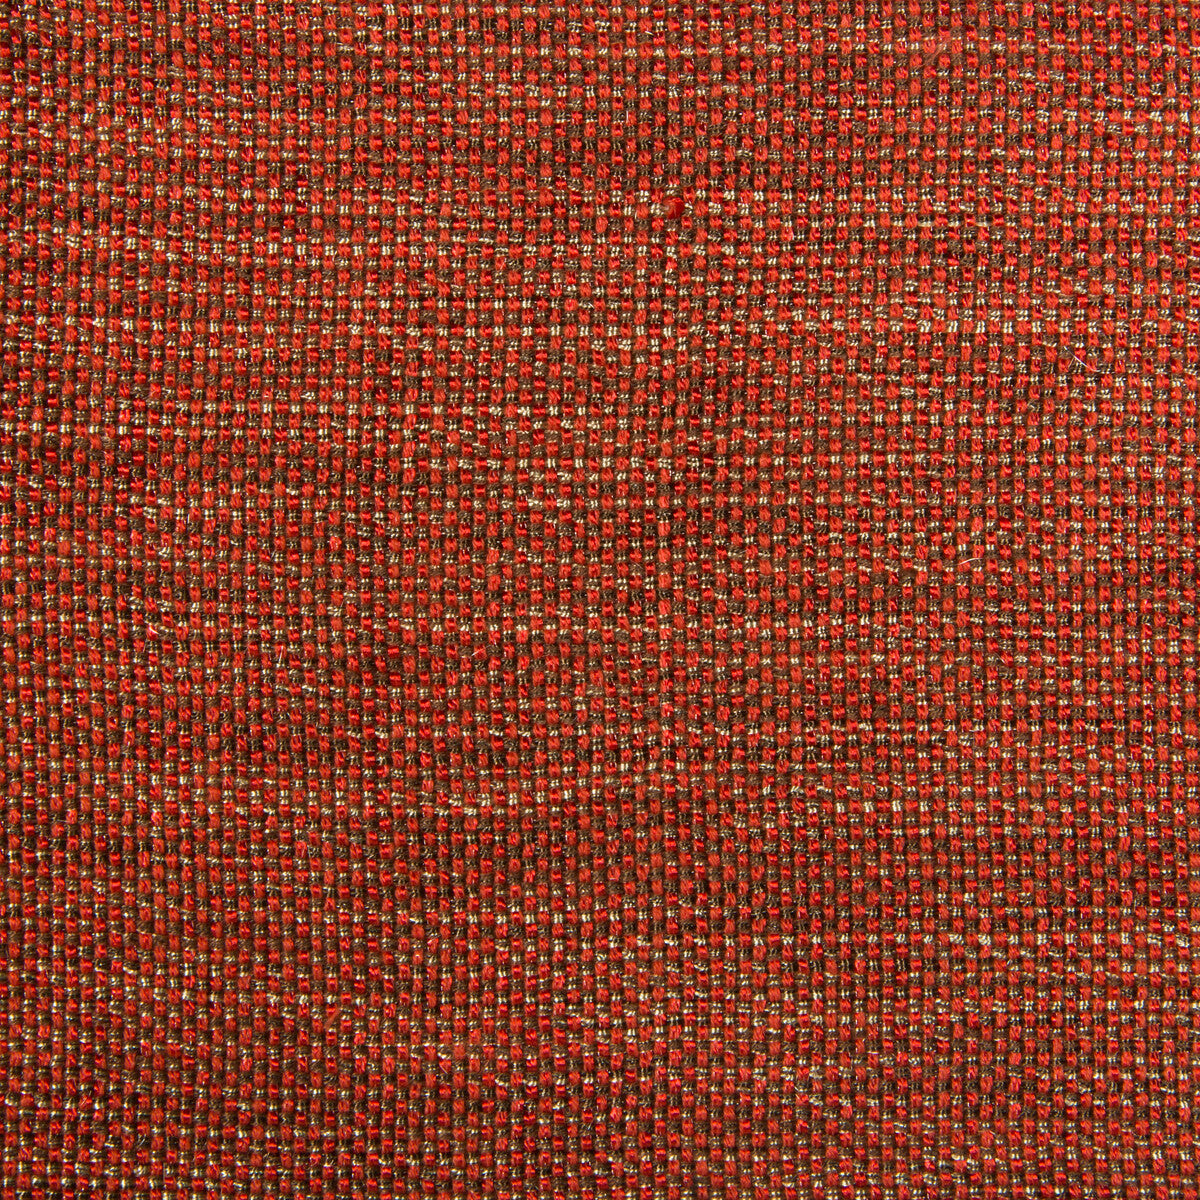 Kravet Contract fabric in 4458-619 color - pattern 4458.619.0 - by Kravet Contract